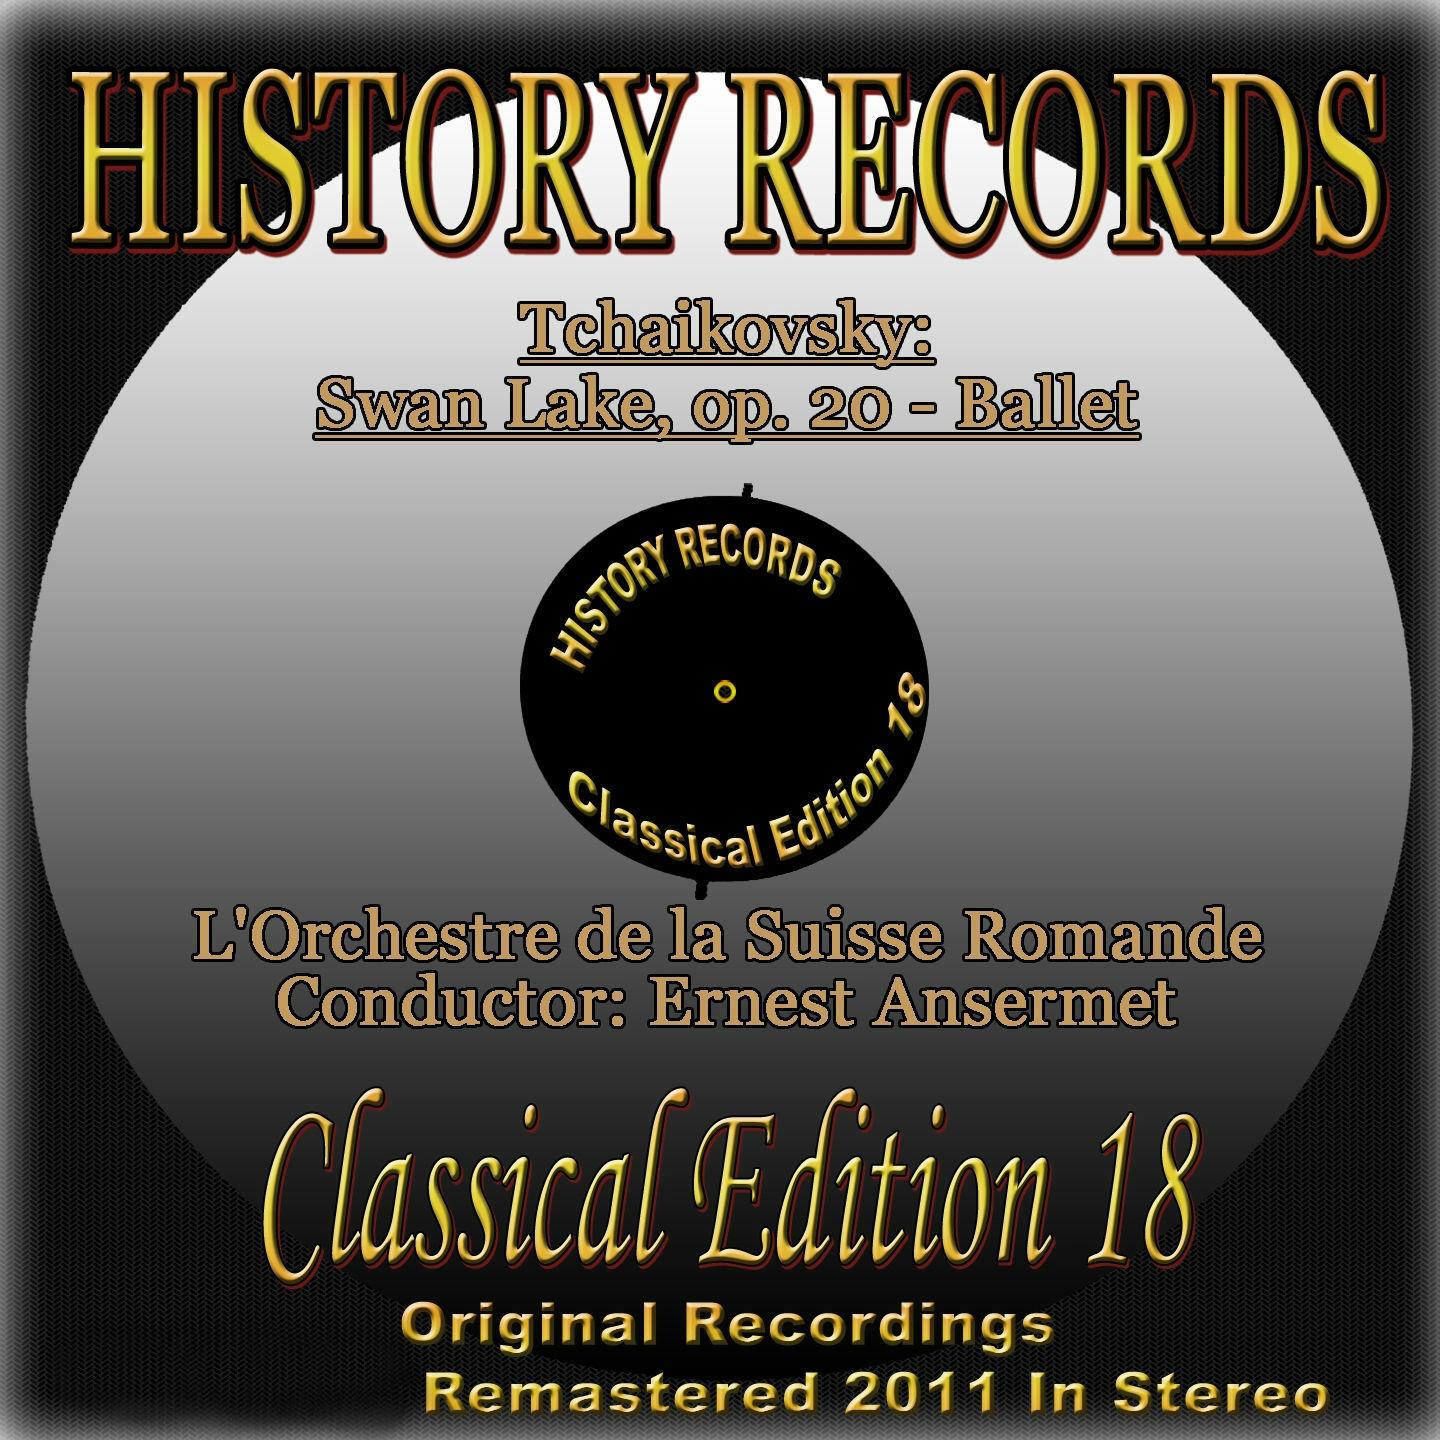 Tchaikovsky: Swan Lake, Op. 20 (History Records - Classical Edition 18 - Original Recordings Digitally Remastered 2011 in Stereo)